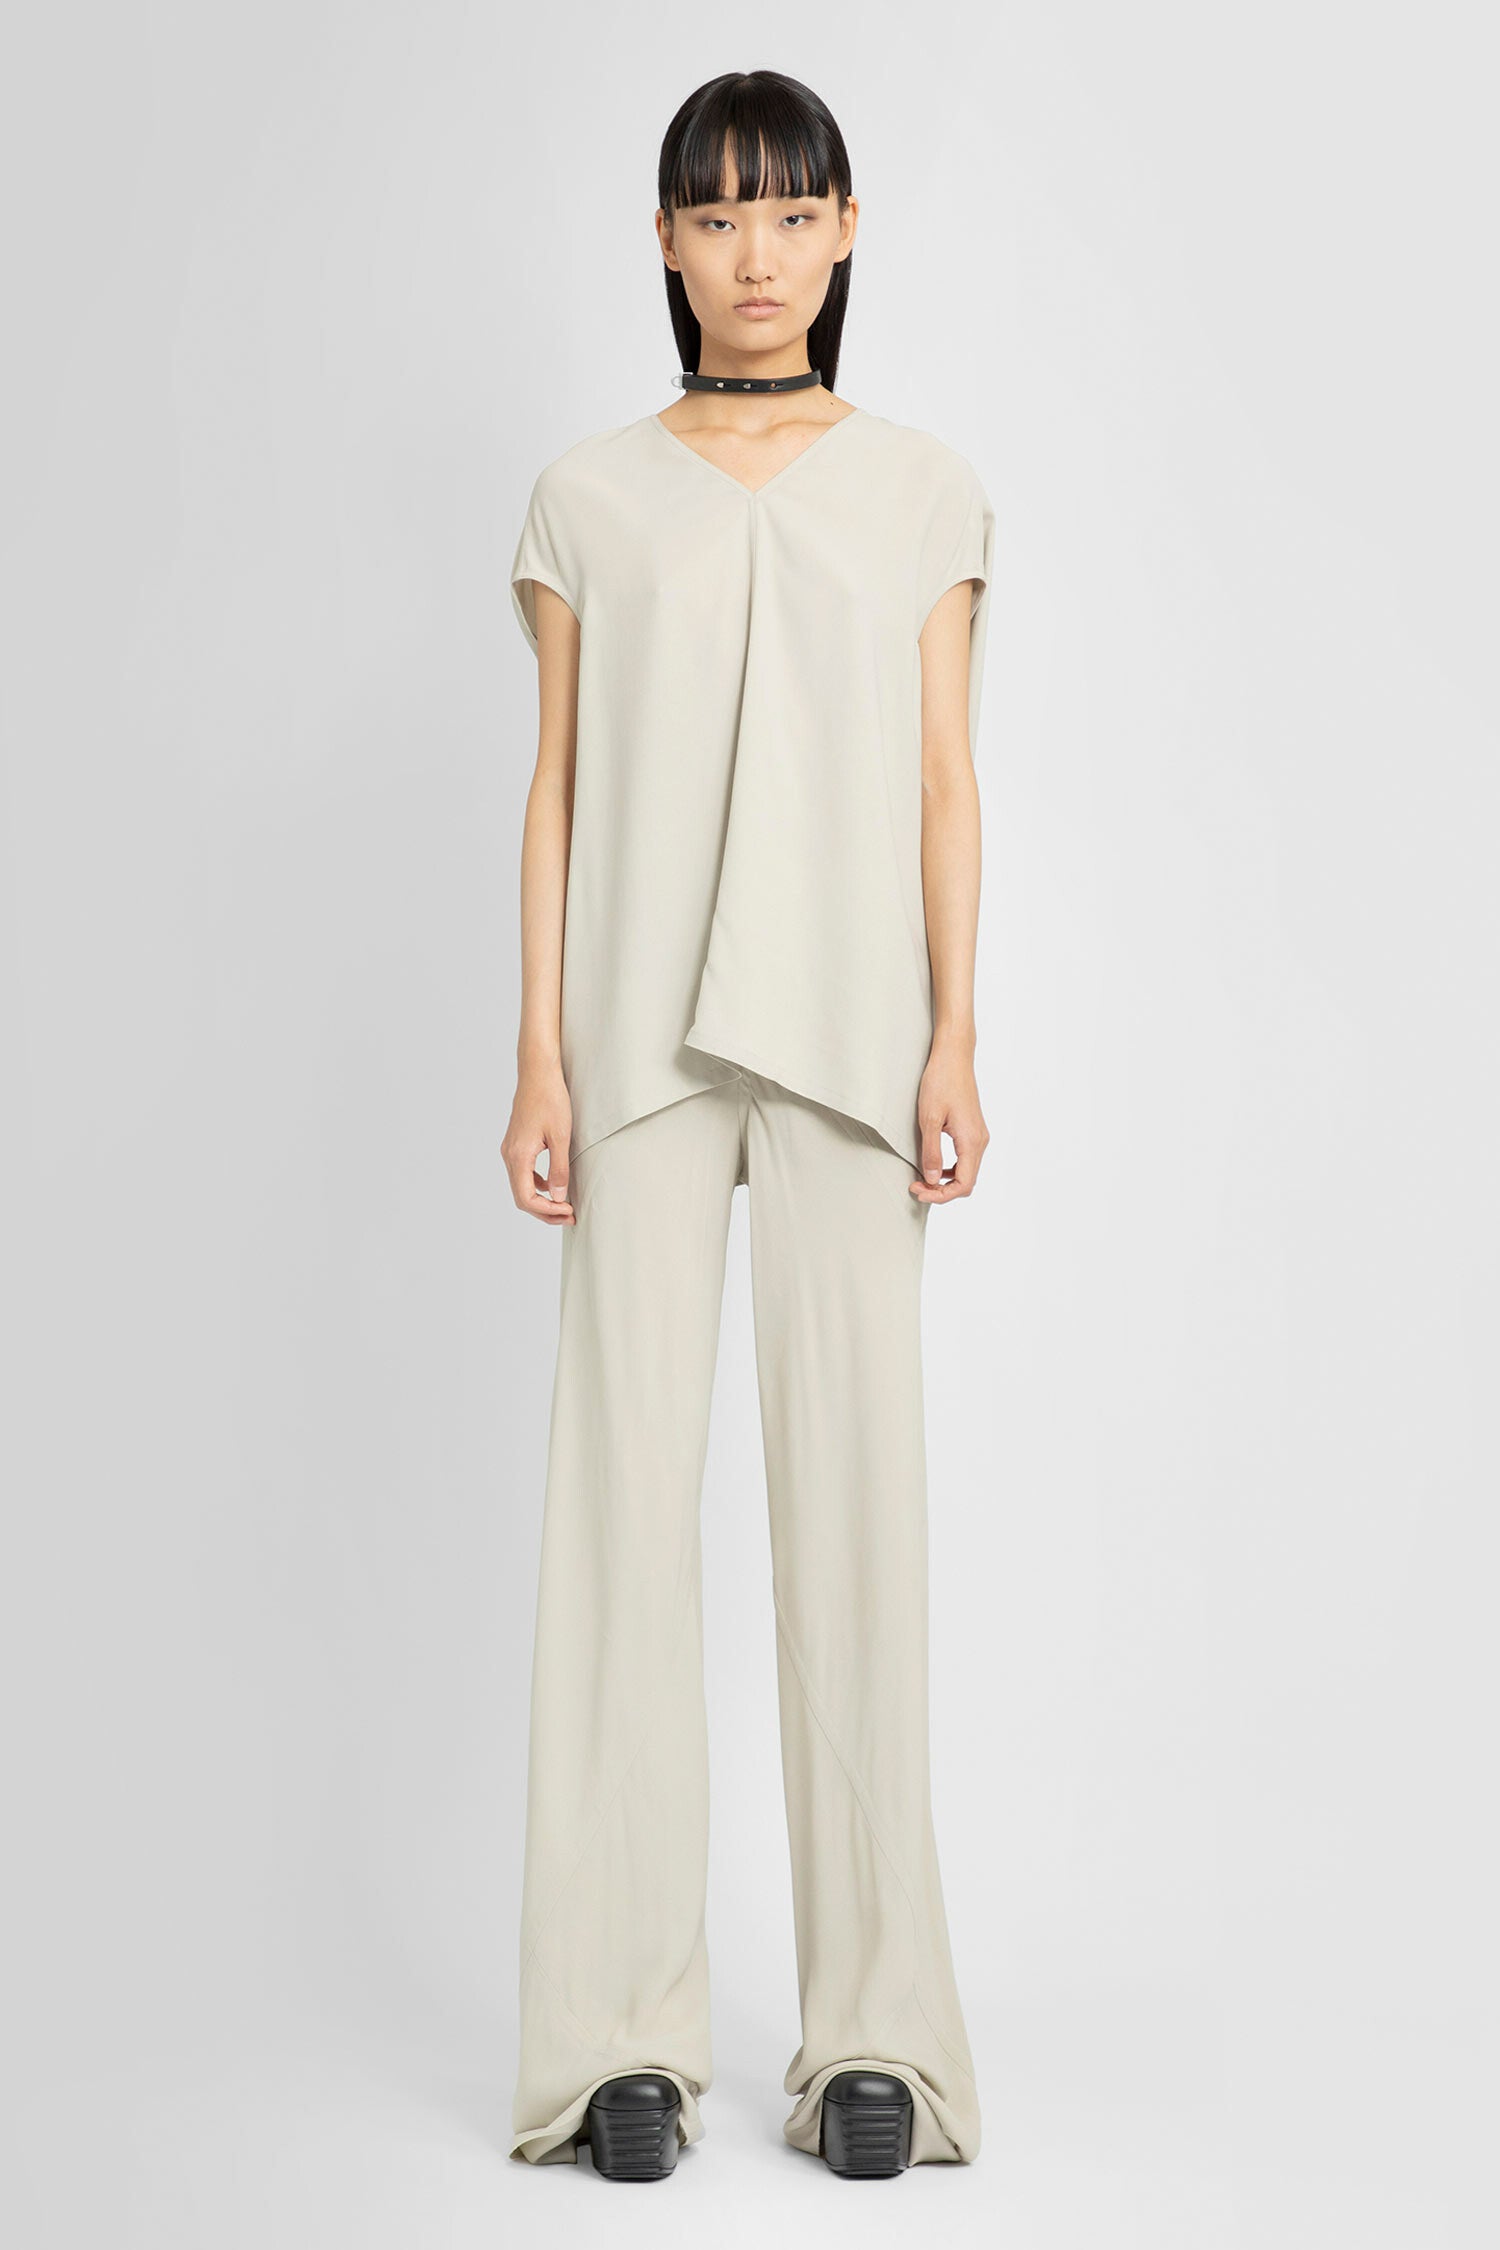 RICK OWENS WOMAN OFF-WHITE TOPS - RICK OWENS - TOPS